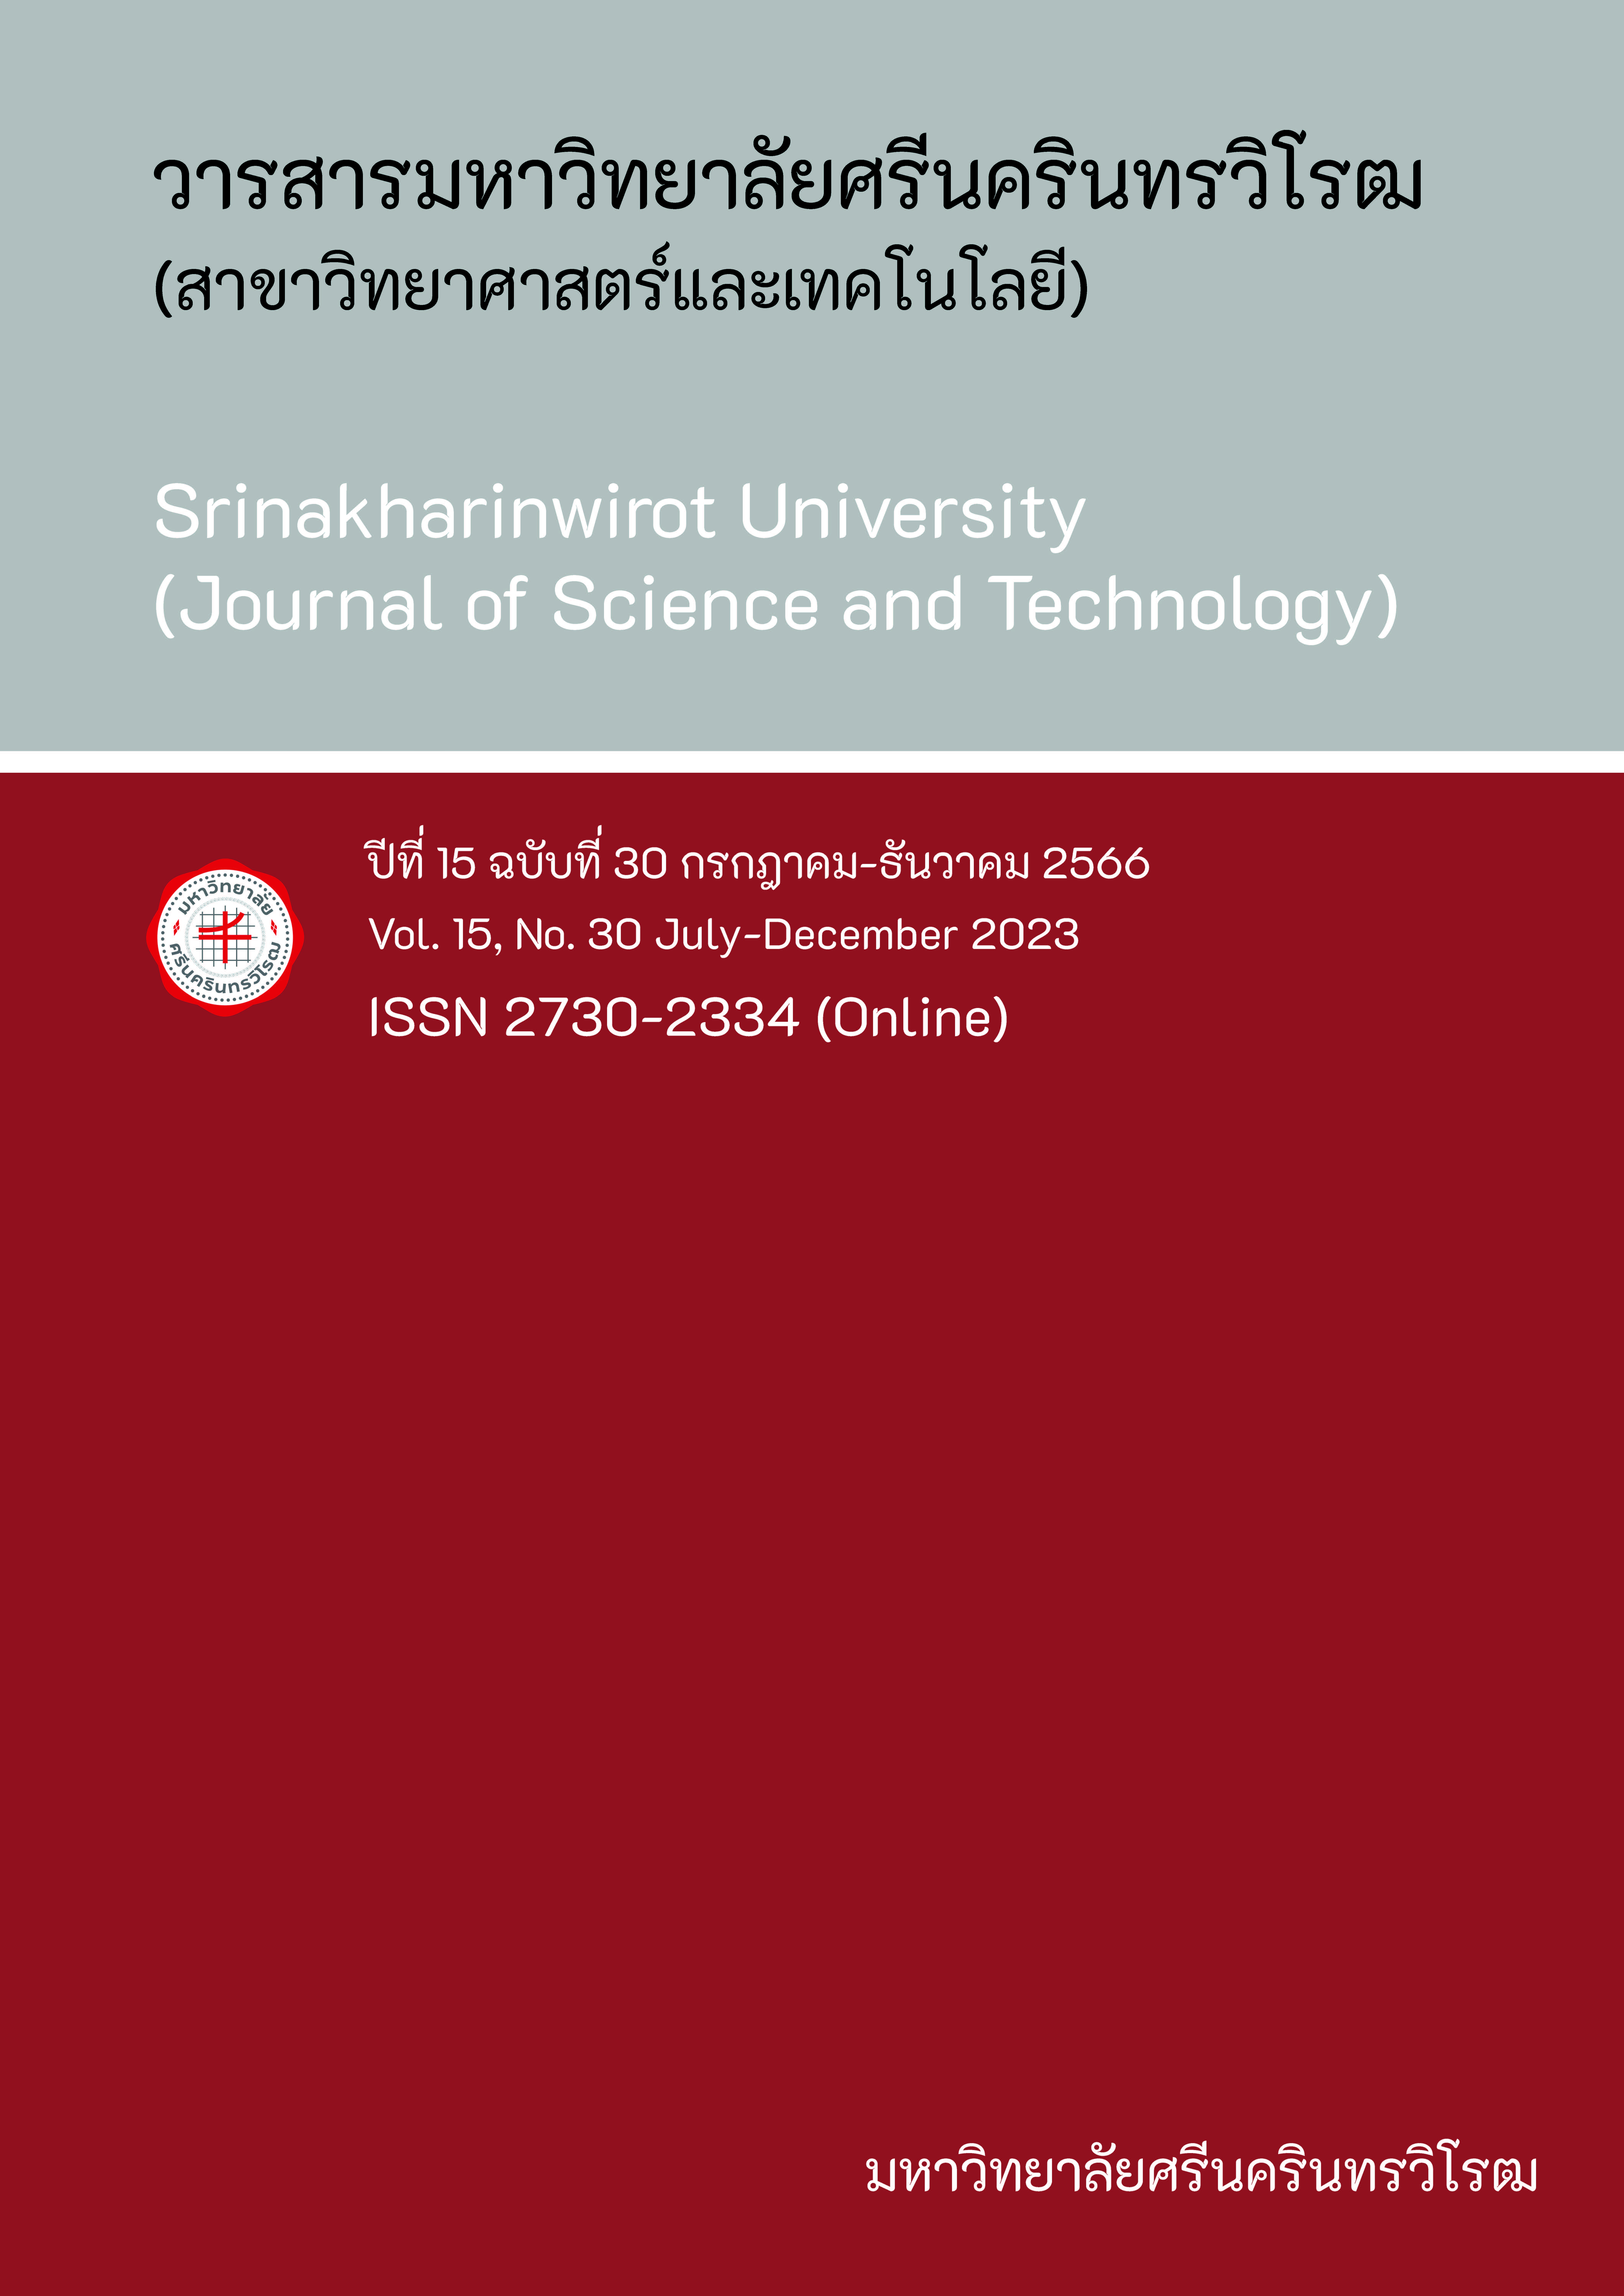 					View Vol. 15 No. 30, July-December (2023): Srinakharinwirot University (Journal of Science and Technology)
				